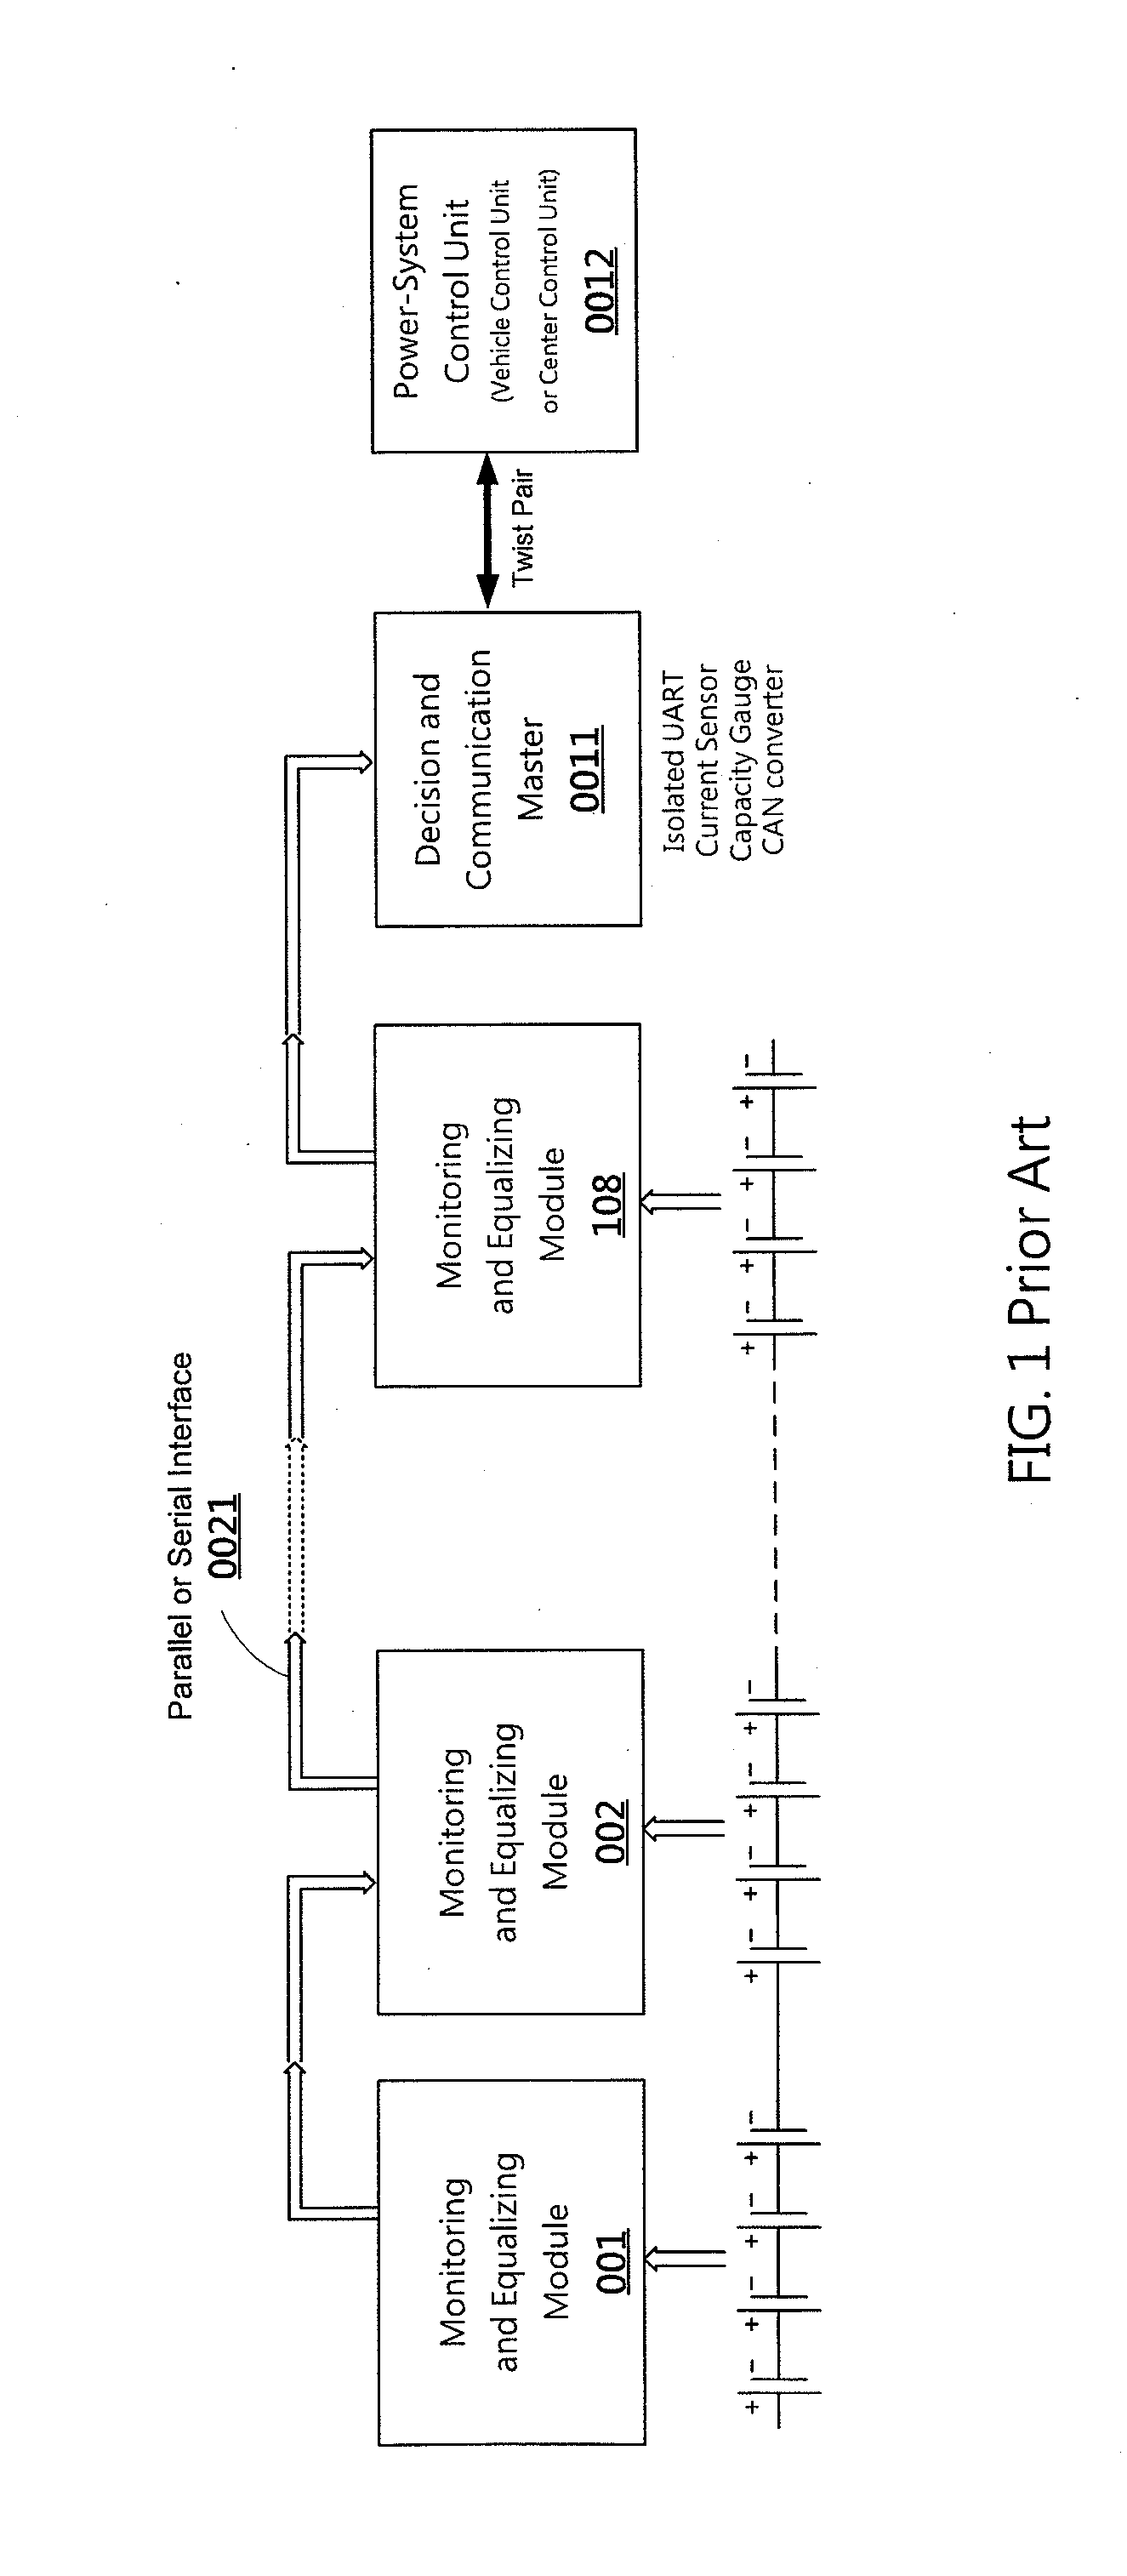 Hierarchical battery management system